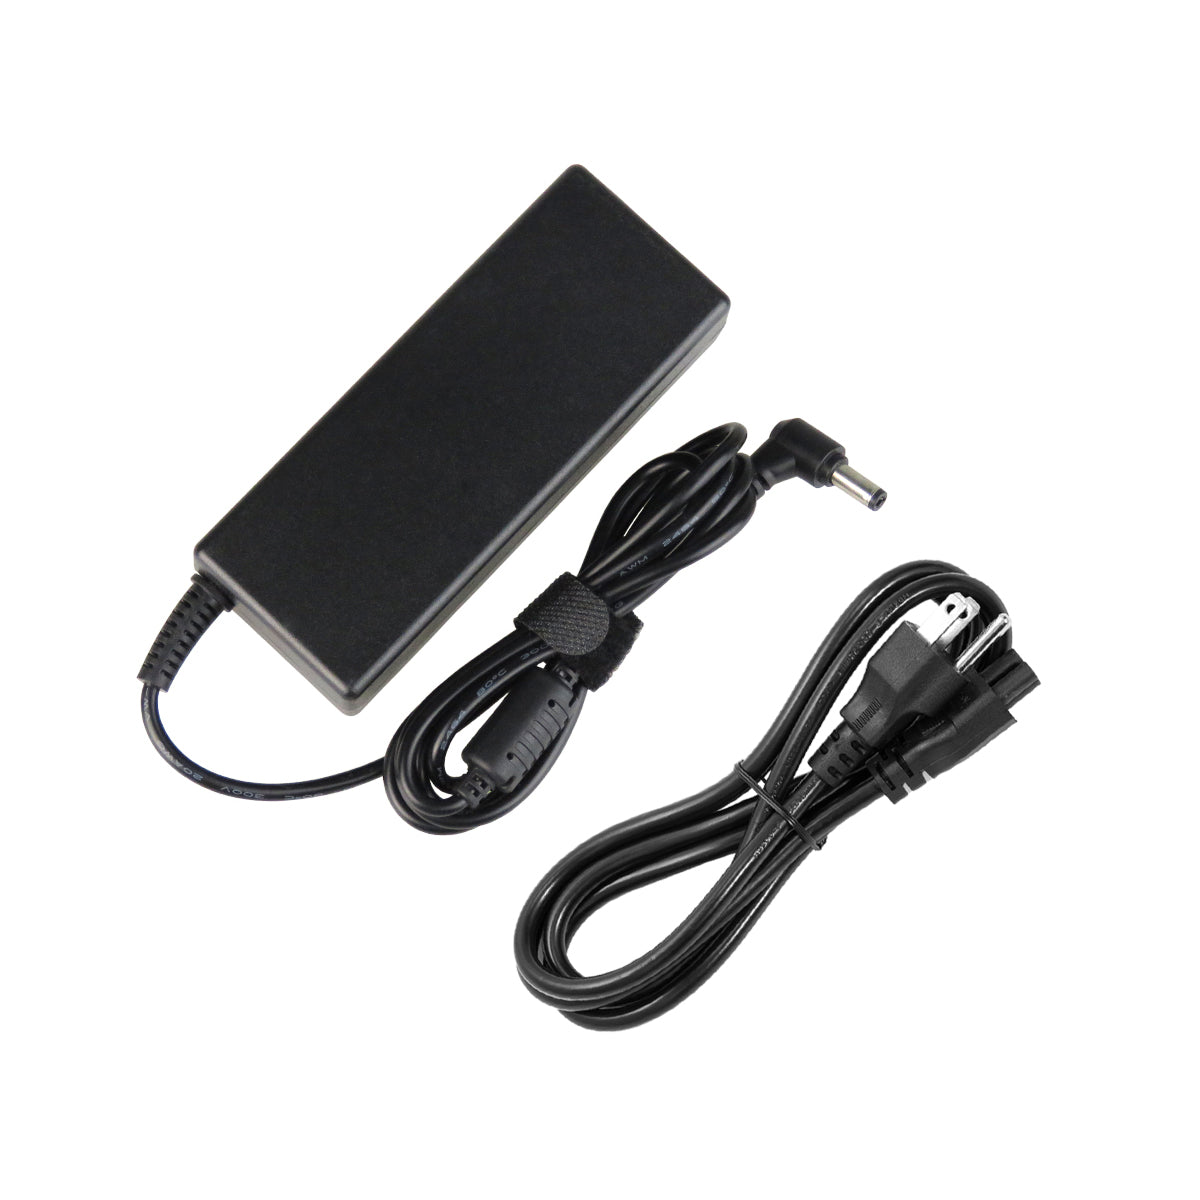 AC Adapter Charger for ASUS K43SM Notebook.